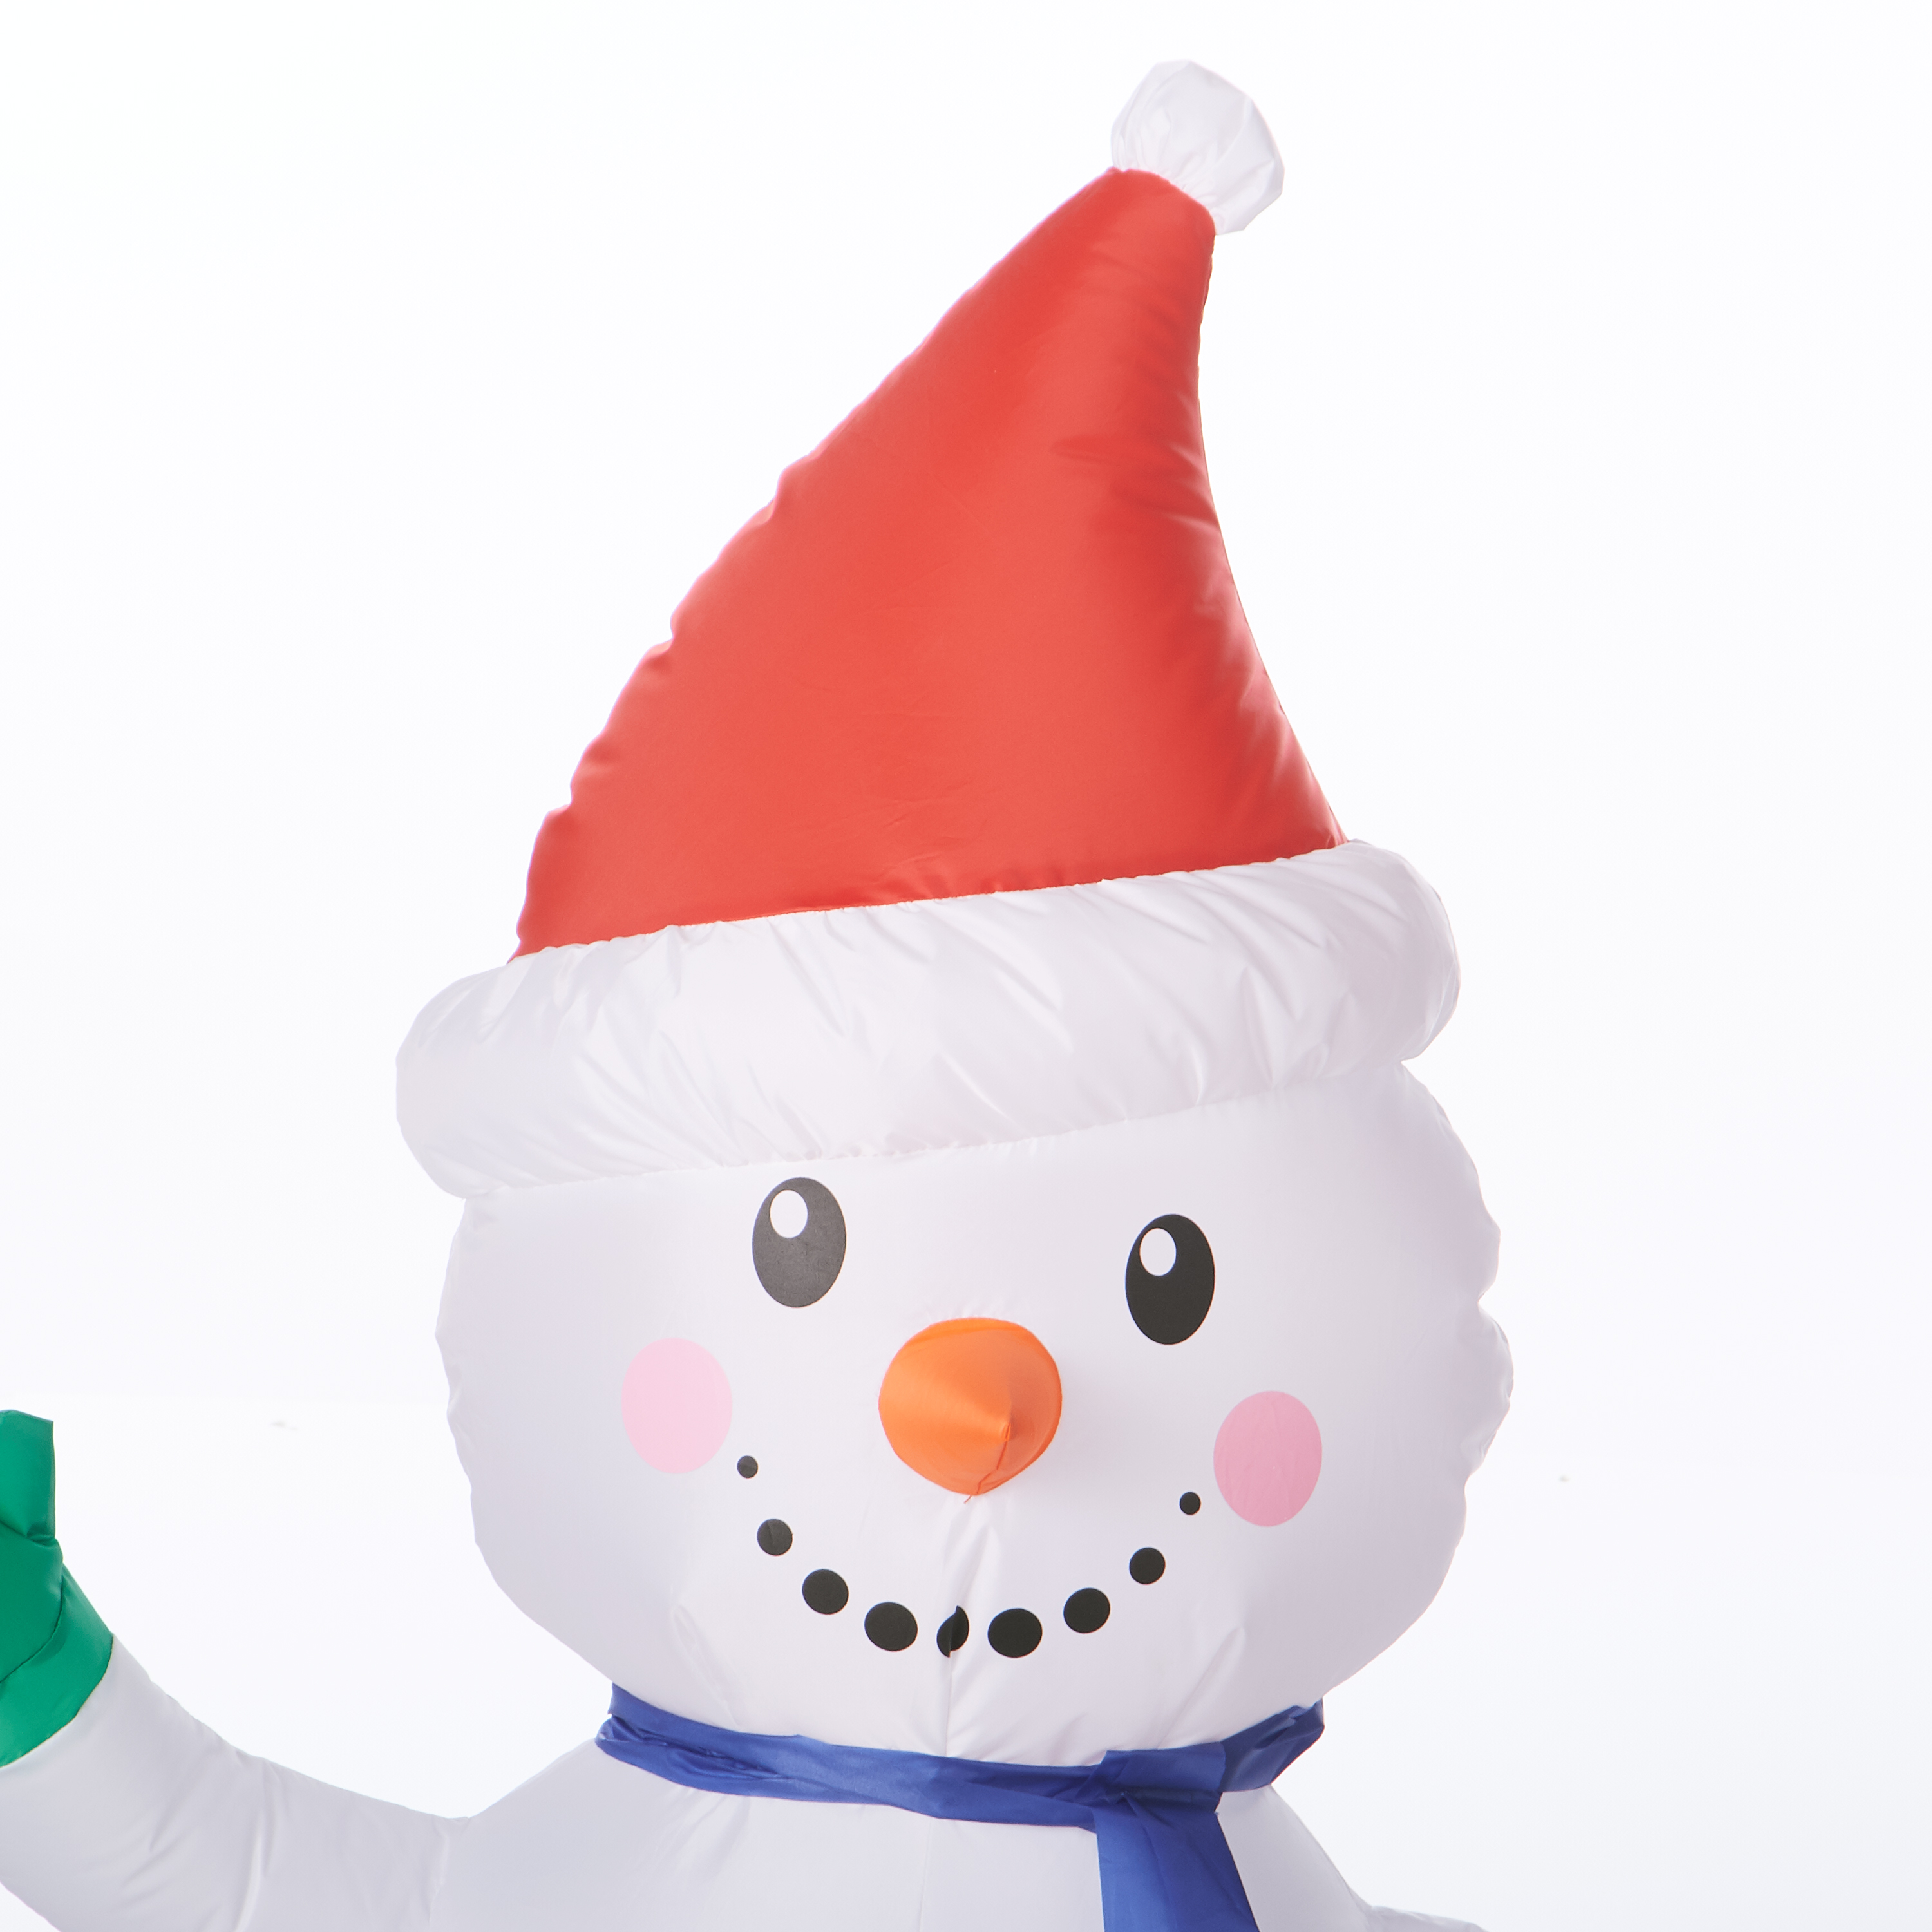 Airblown Inflatables 4 Ft. Waving Snowman - image 4 of 5